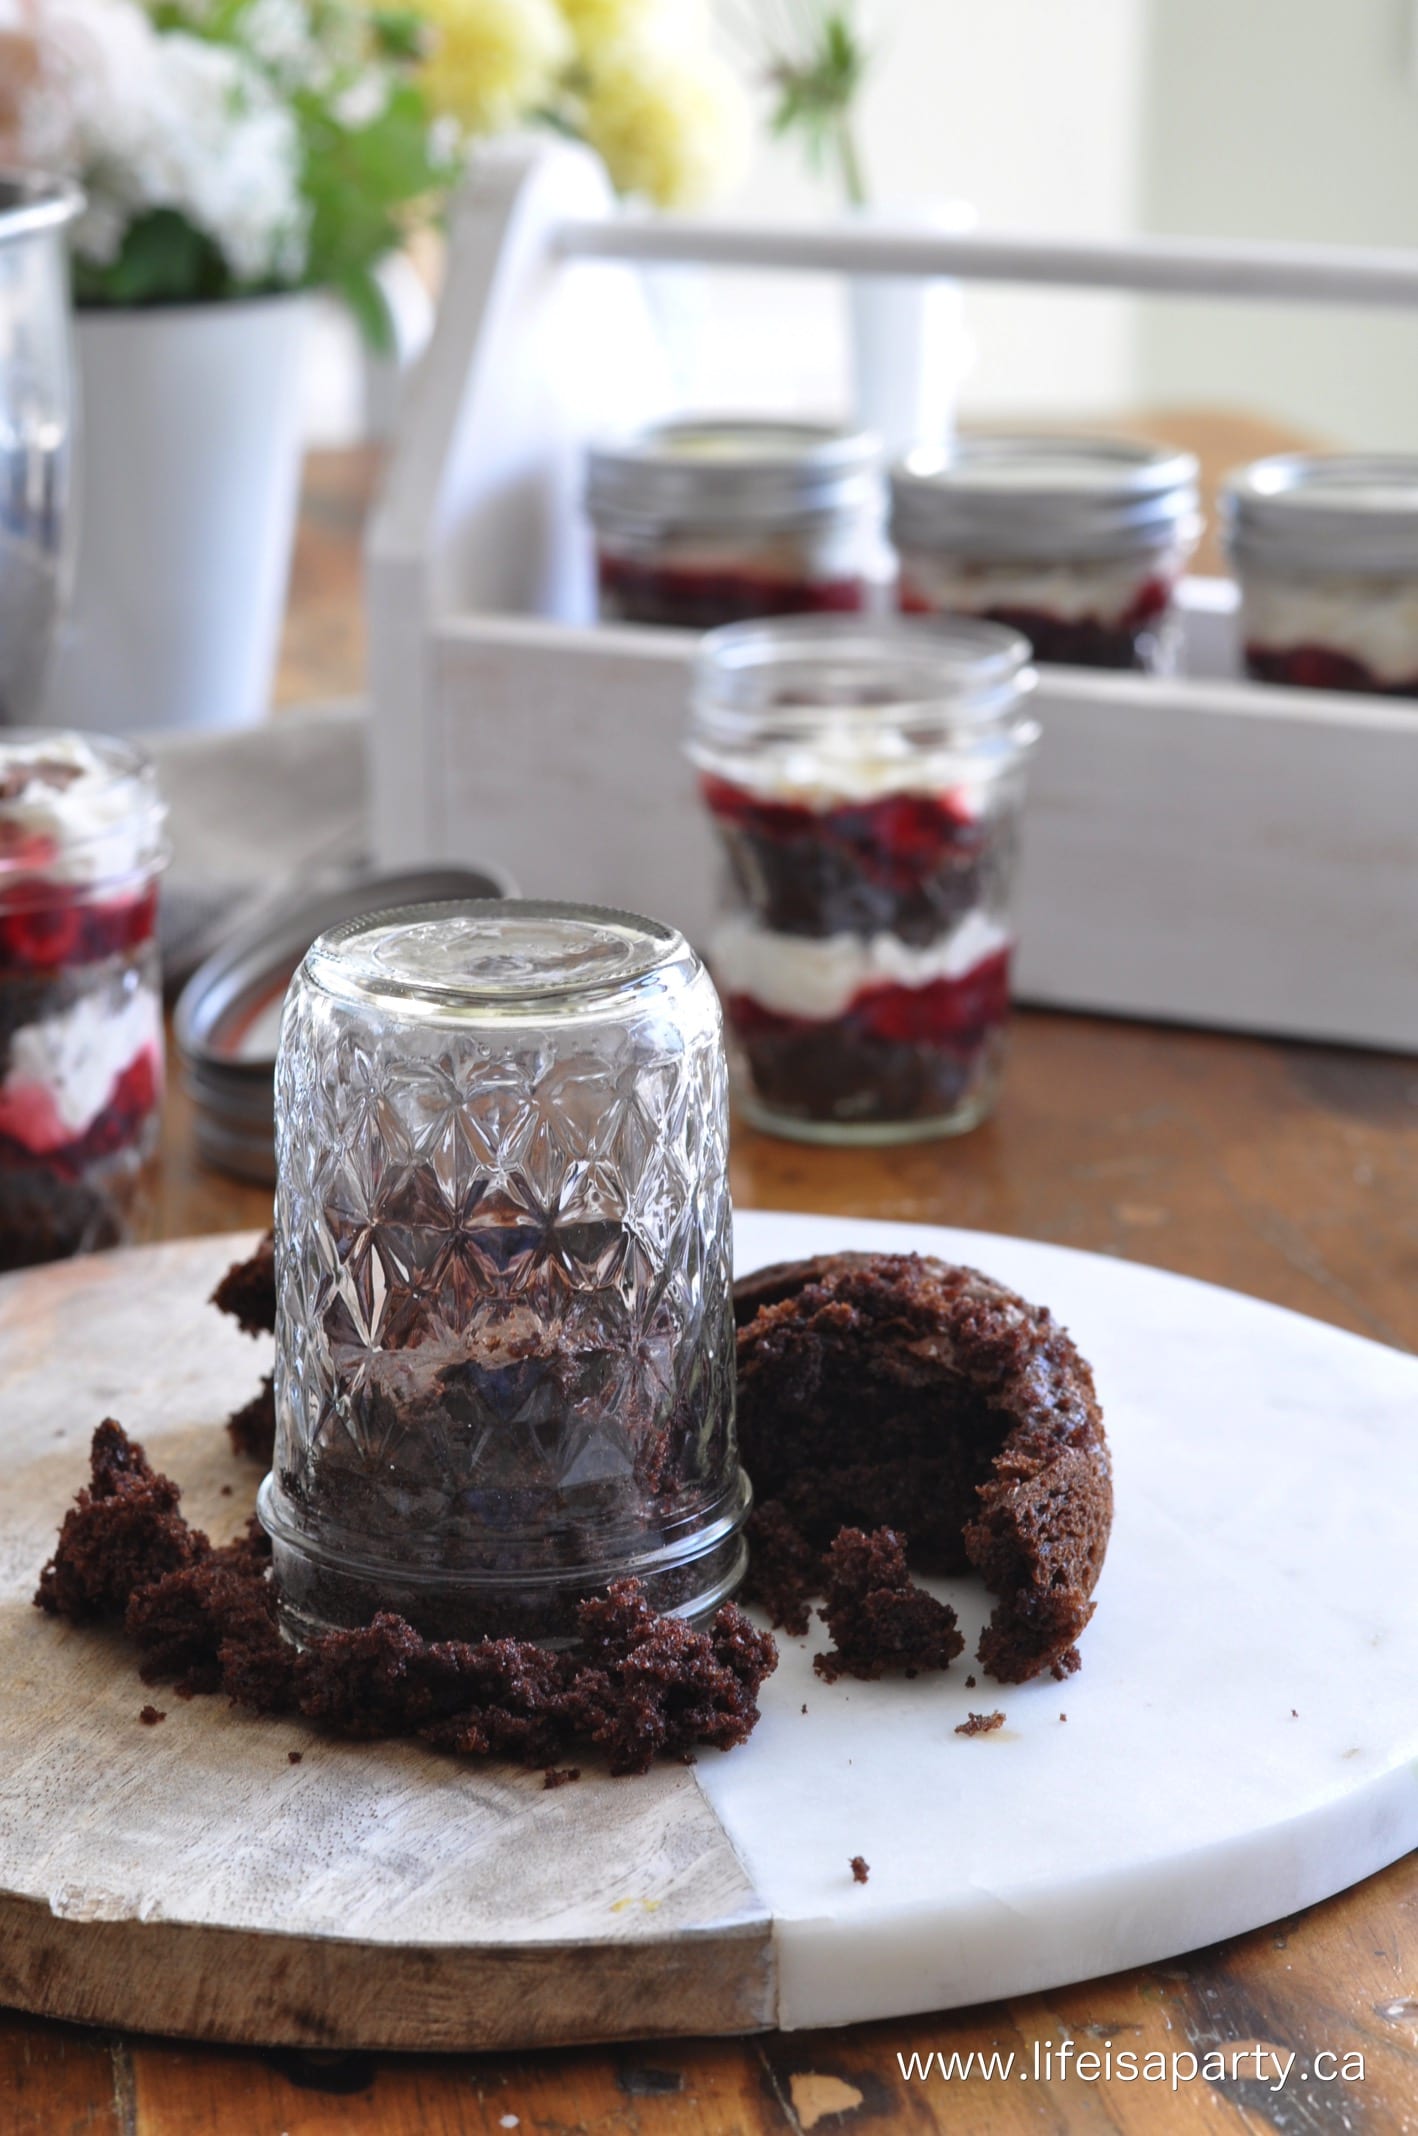 How to make Black Forest Cake in a Mason Jar